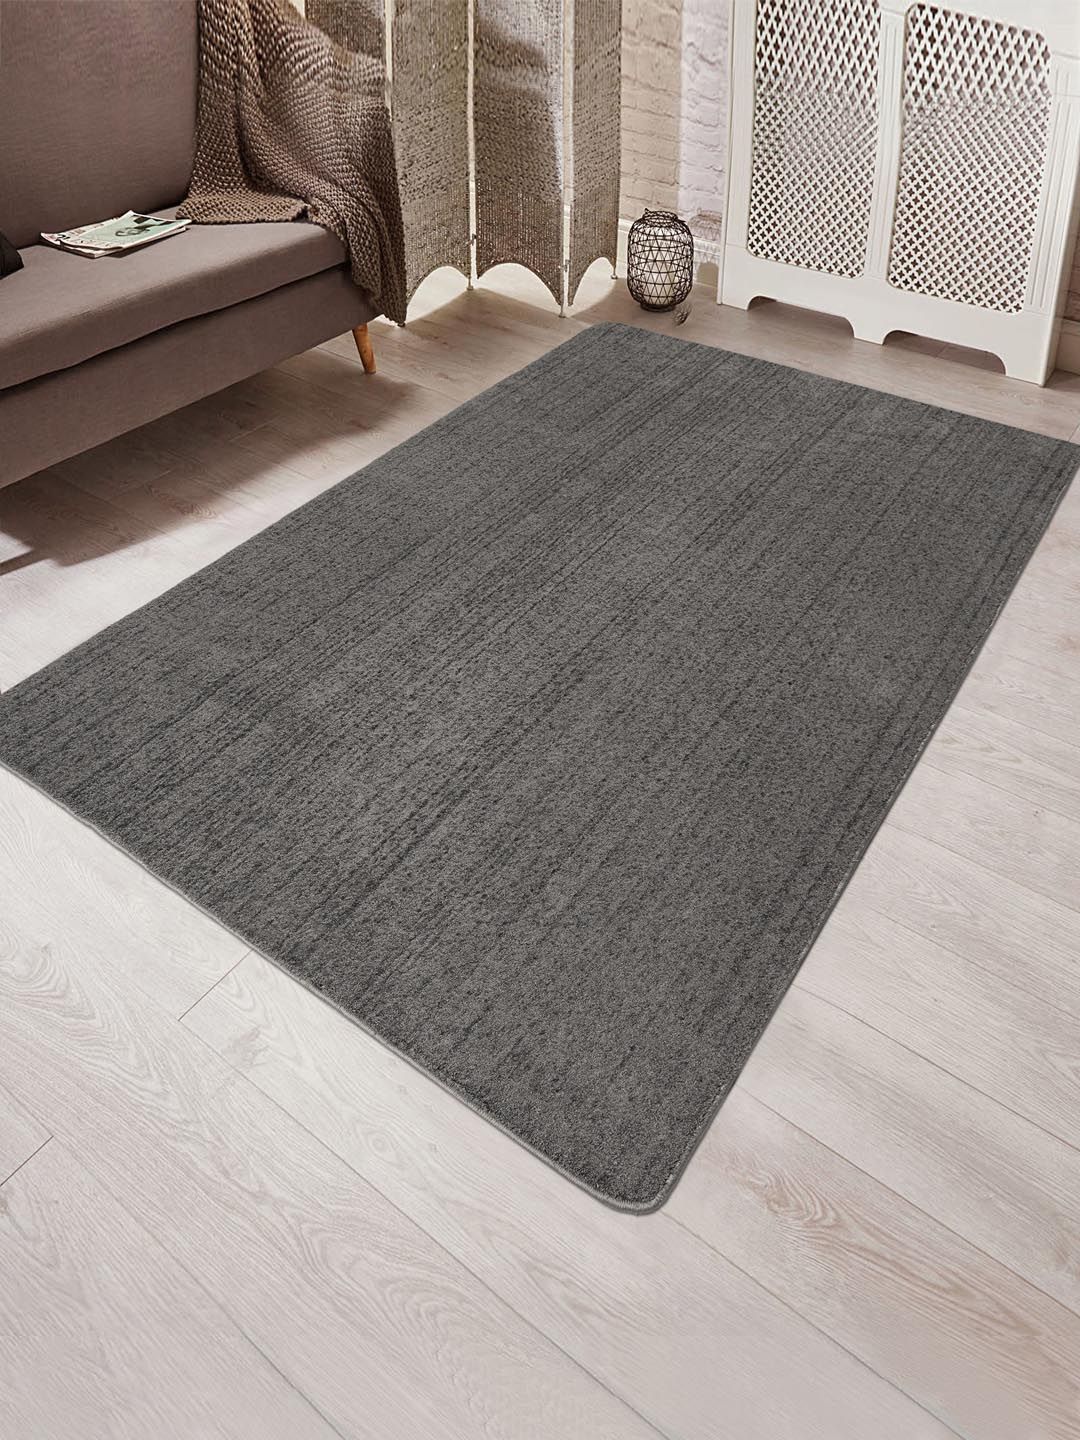 Saral Home Grey Solid Shaggy Anti-Skid Carpet Price in India